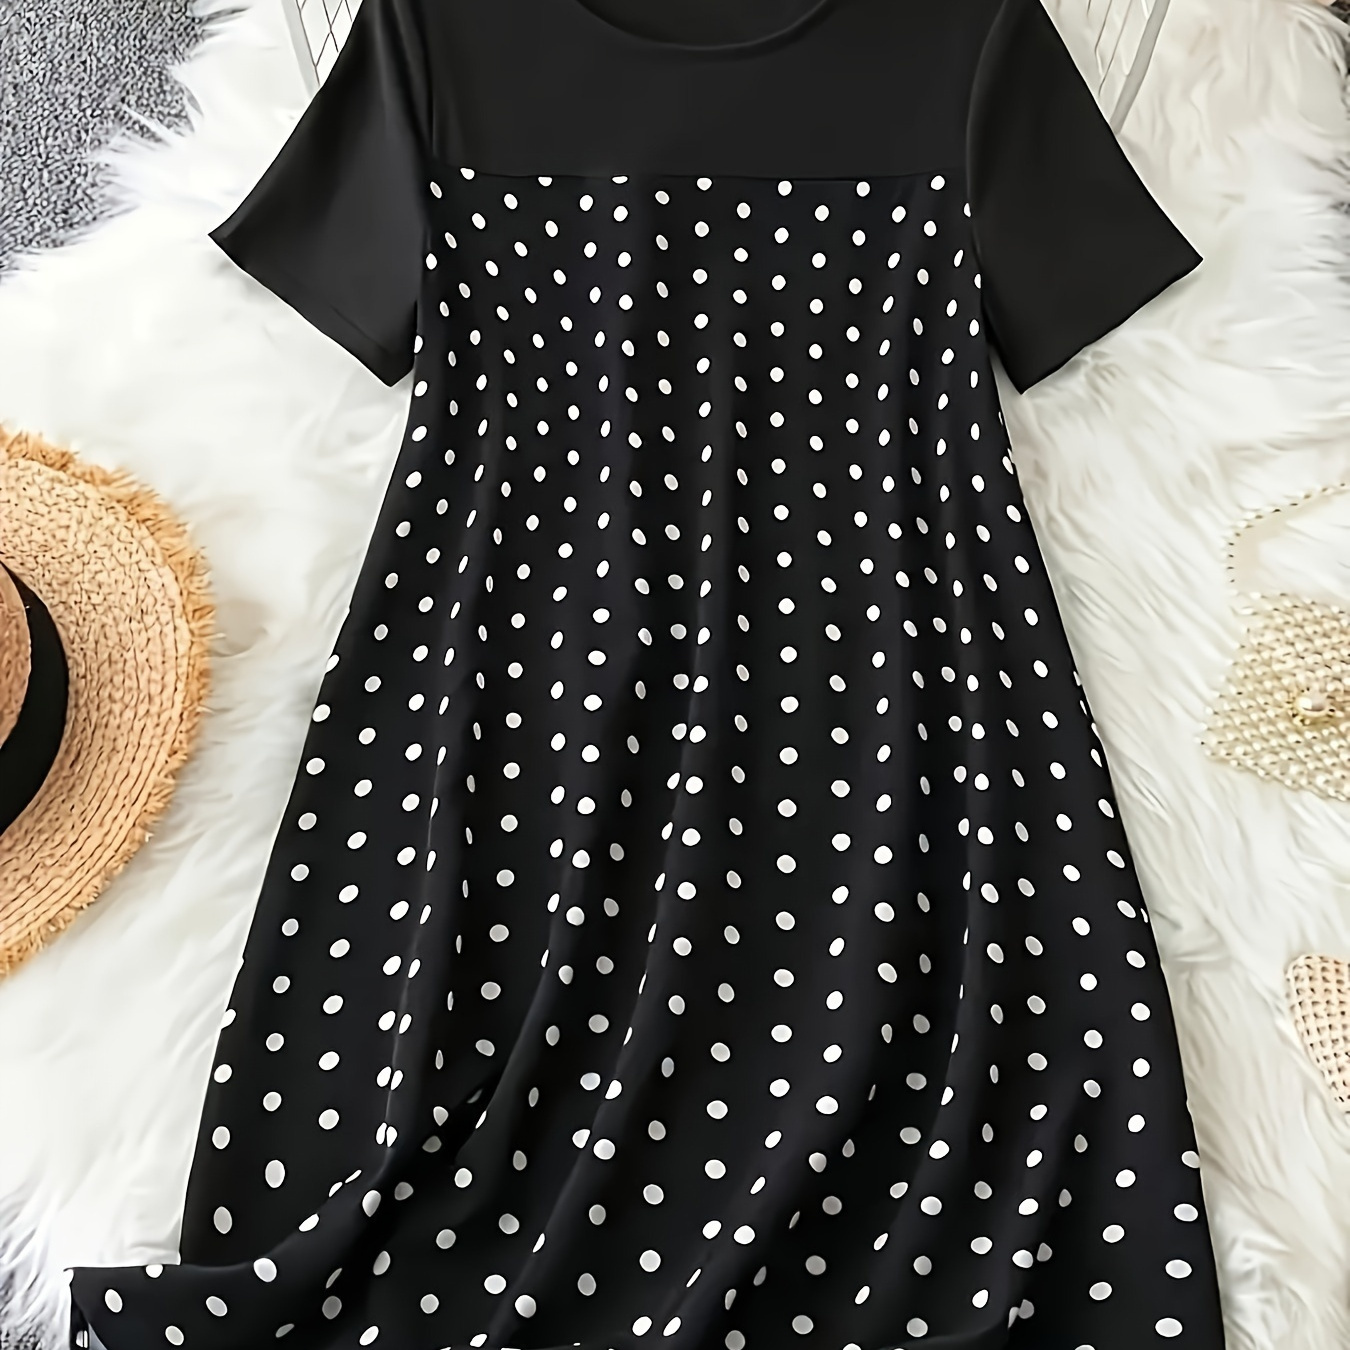 

Plus Size Polka Dot Print Dress, Casual Short Sleeve Crew Neck Dress For Spring & Summer, Women's Plus Size Clothing